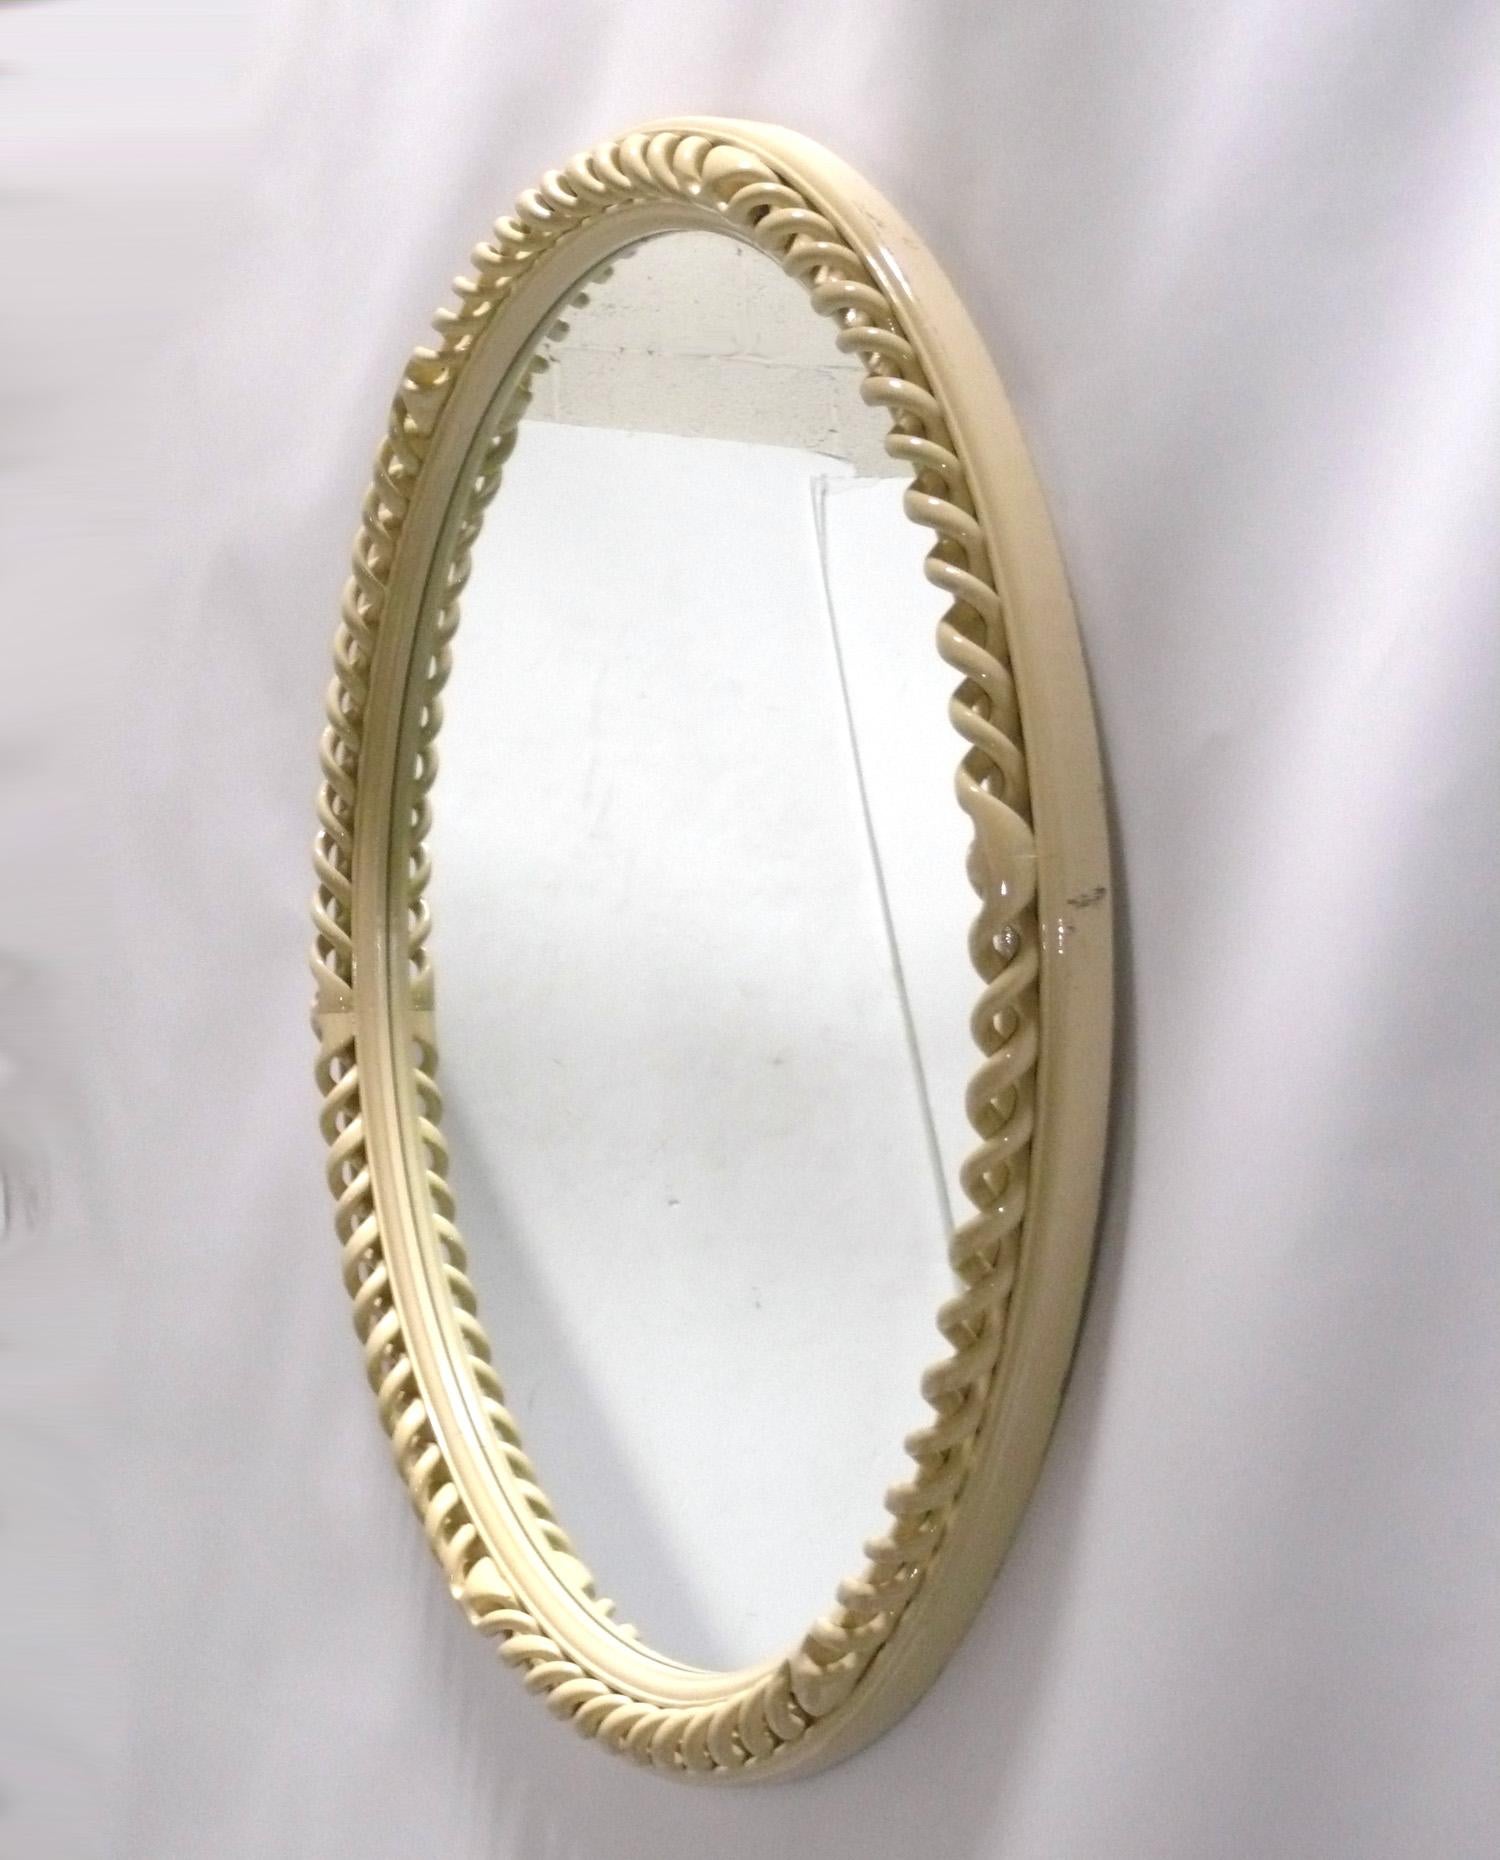 Ivory Color Lacquered Spiral openwork mirror, at least circa 1940s, possibly much earlier. It measures an impressive 41.5